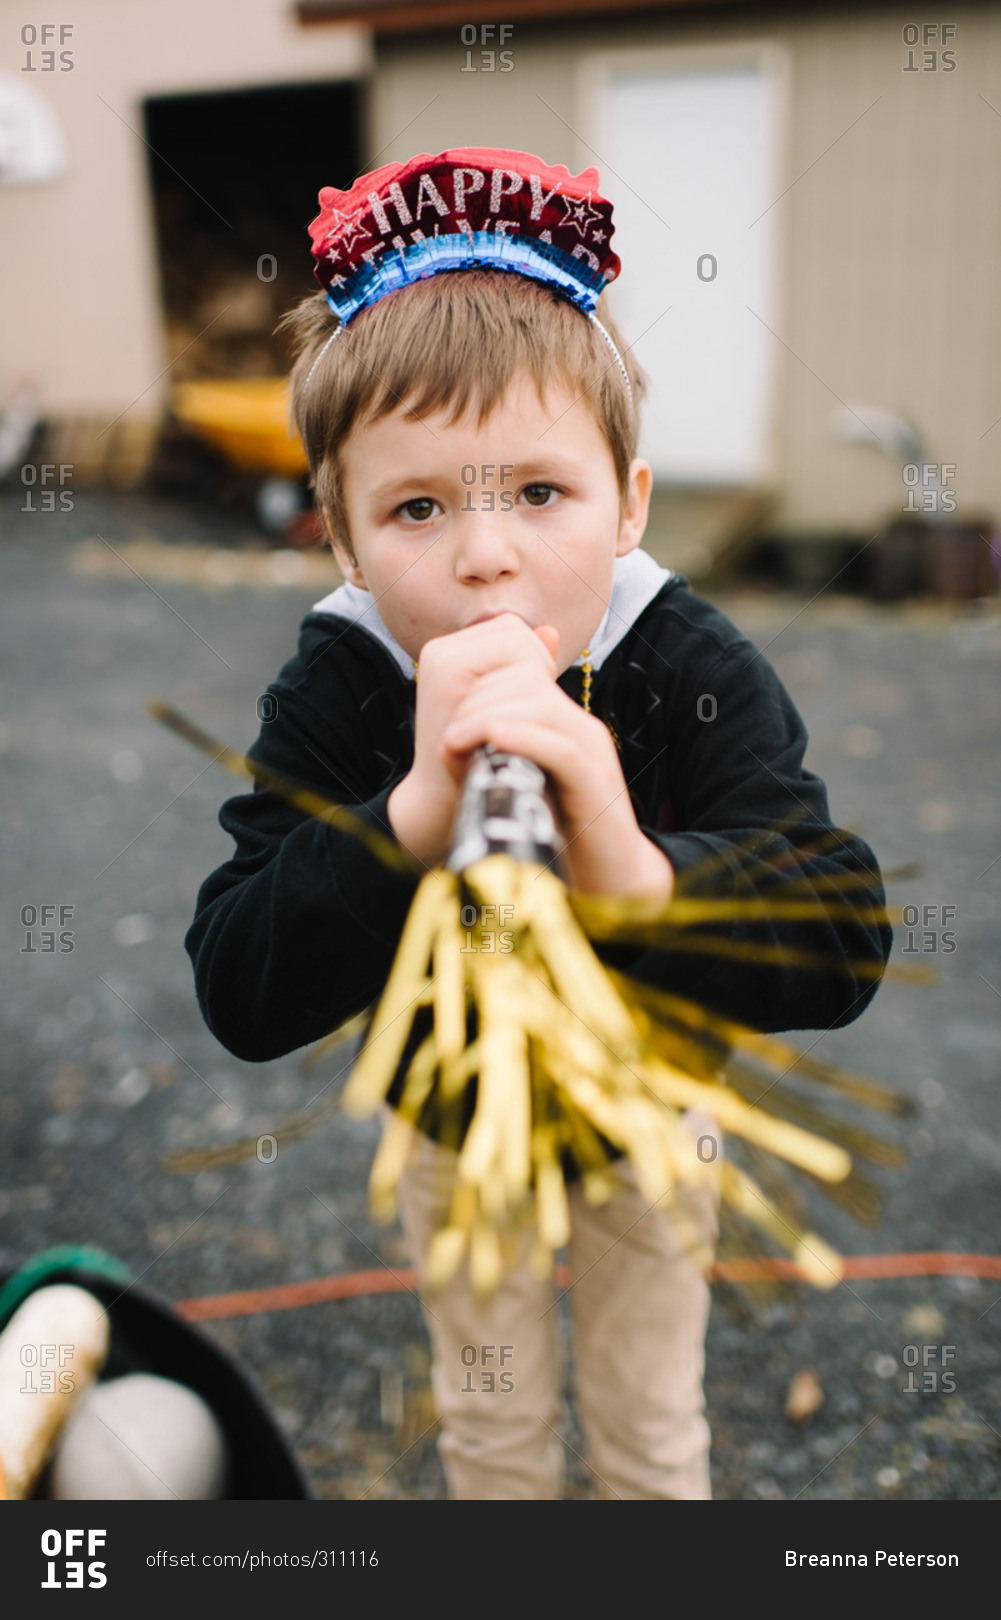 Boy in New Year's headband blowing party horn